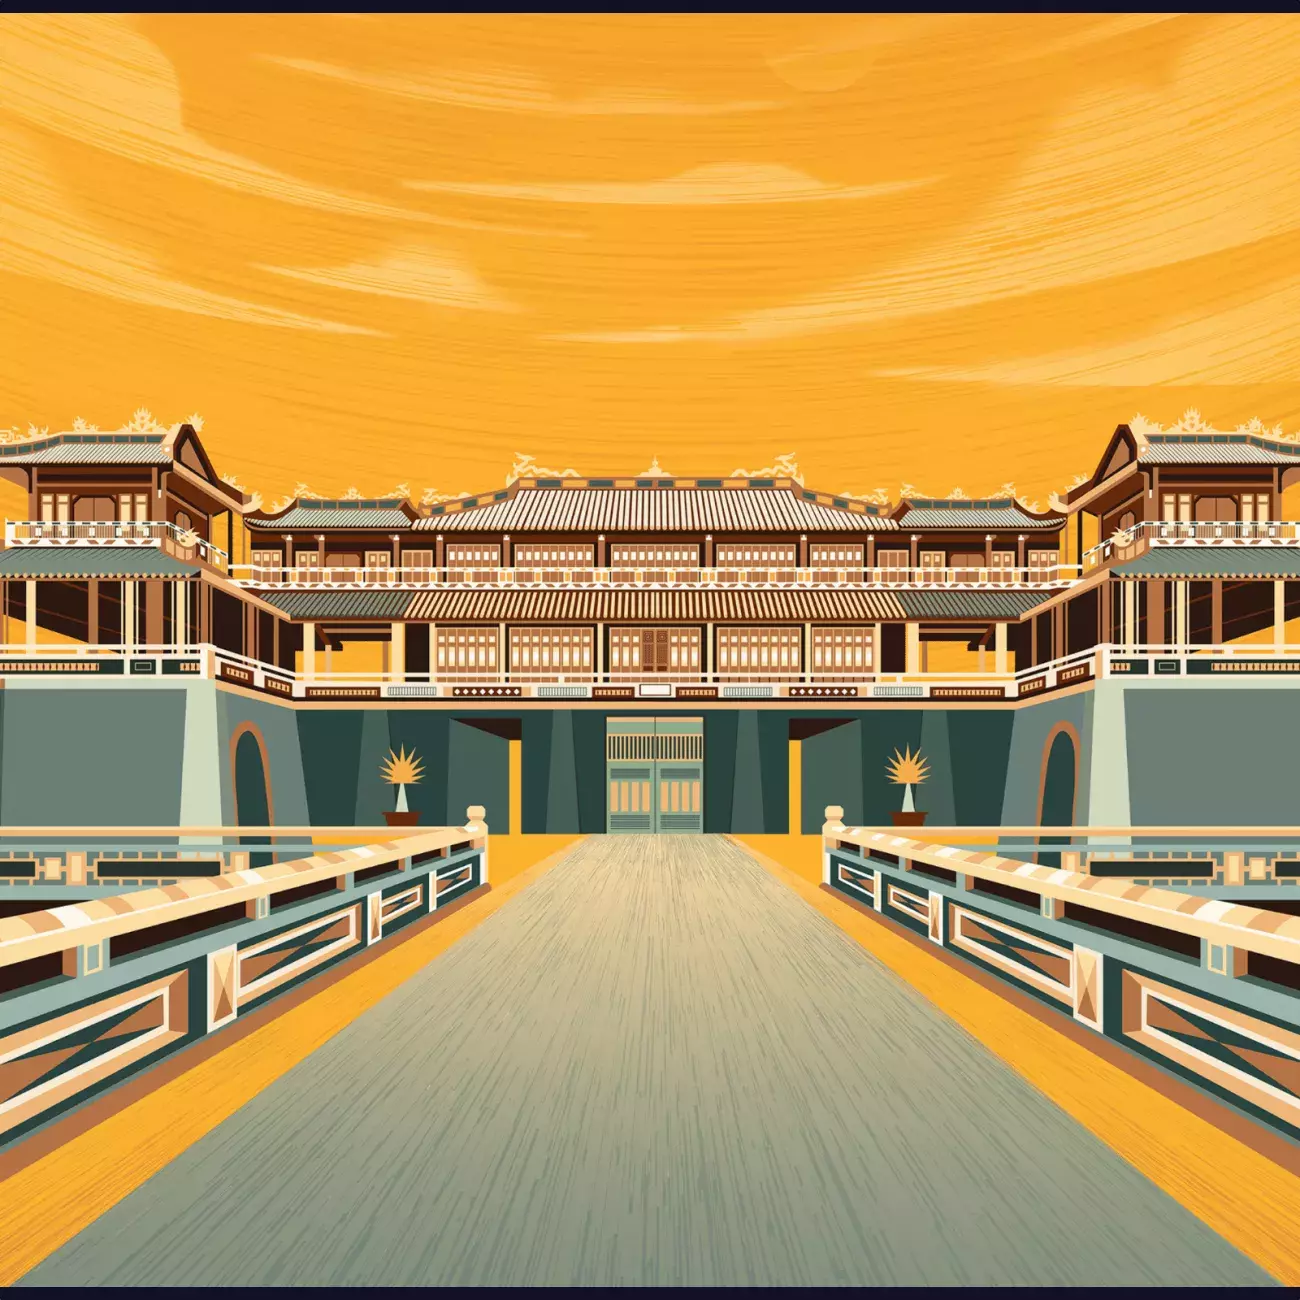 Illustration for the Vietnam's Architectural Culture